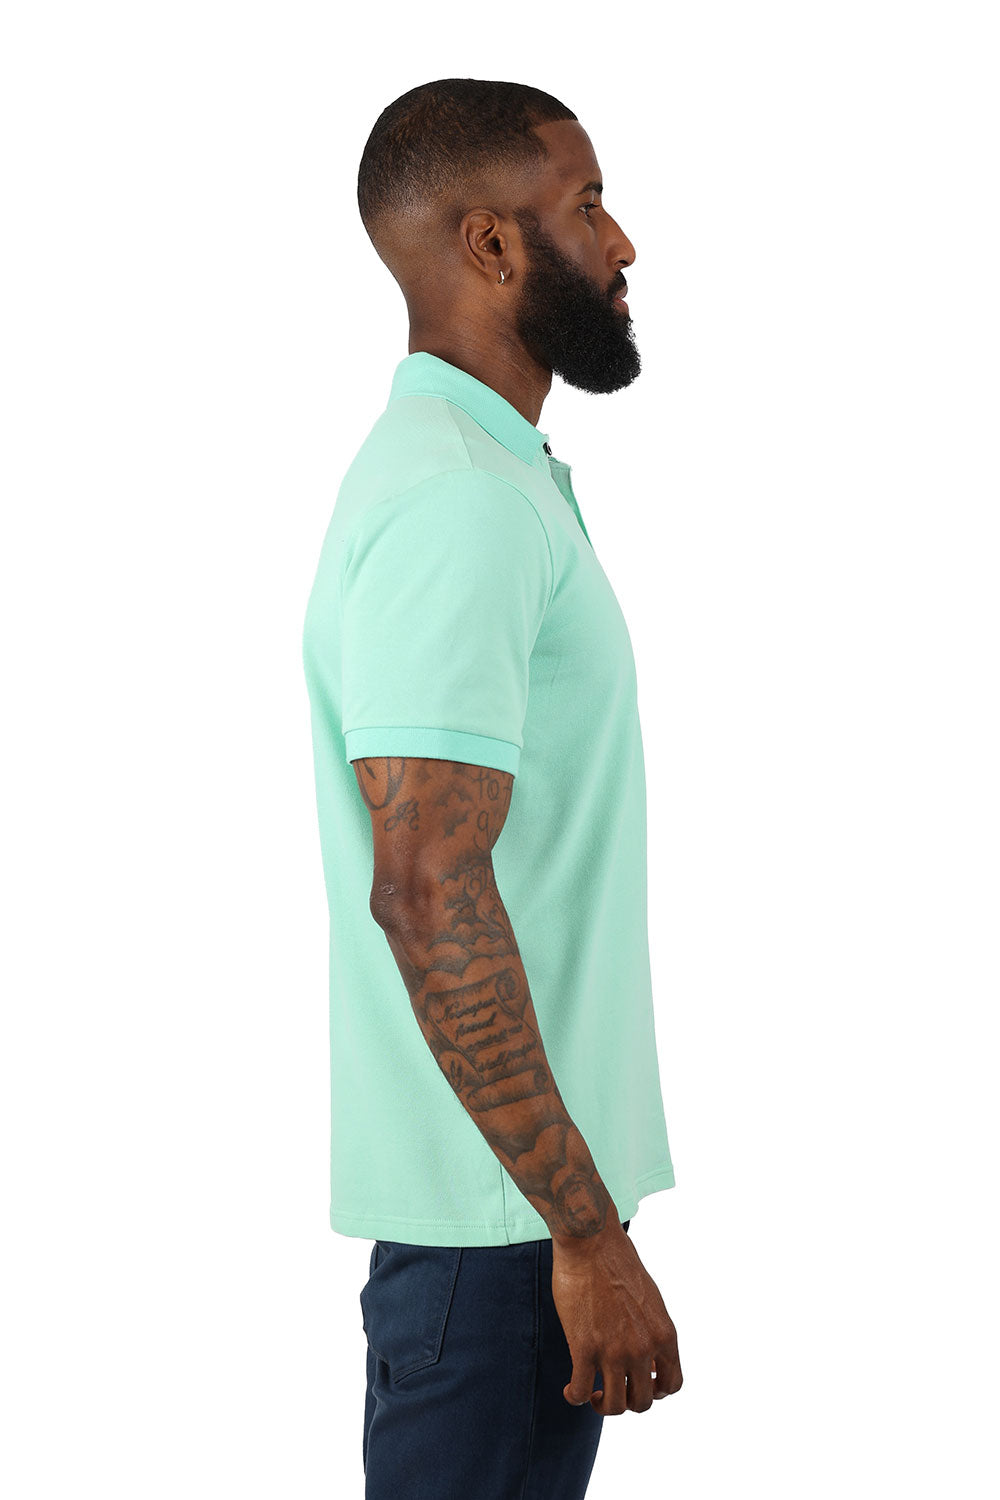 Barabas men's Solid Color With Logo Polo Shirts 3PP833 Mint